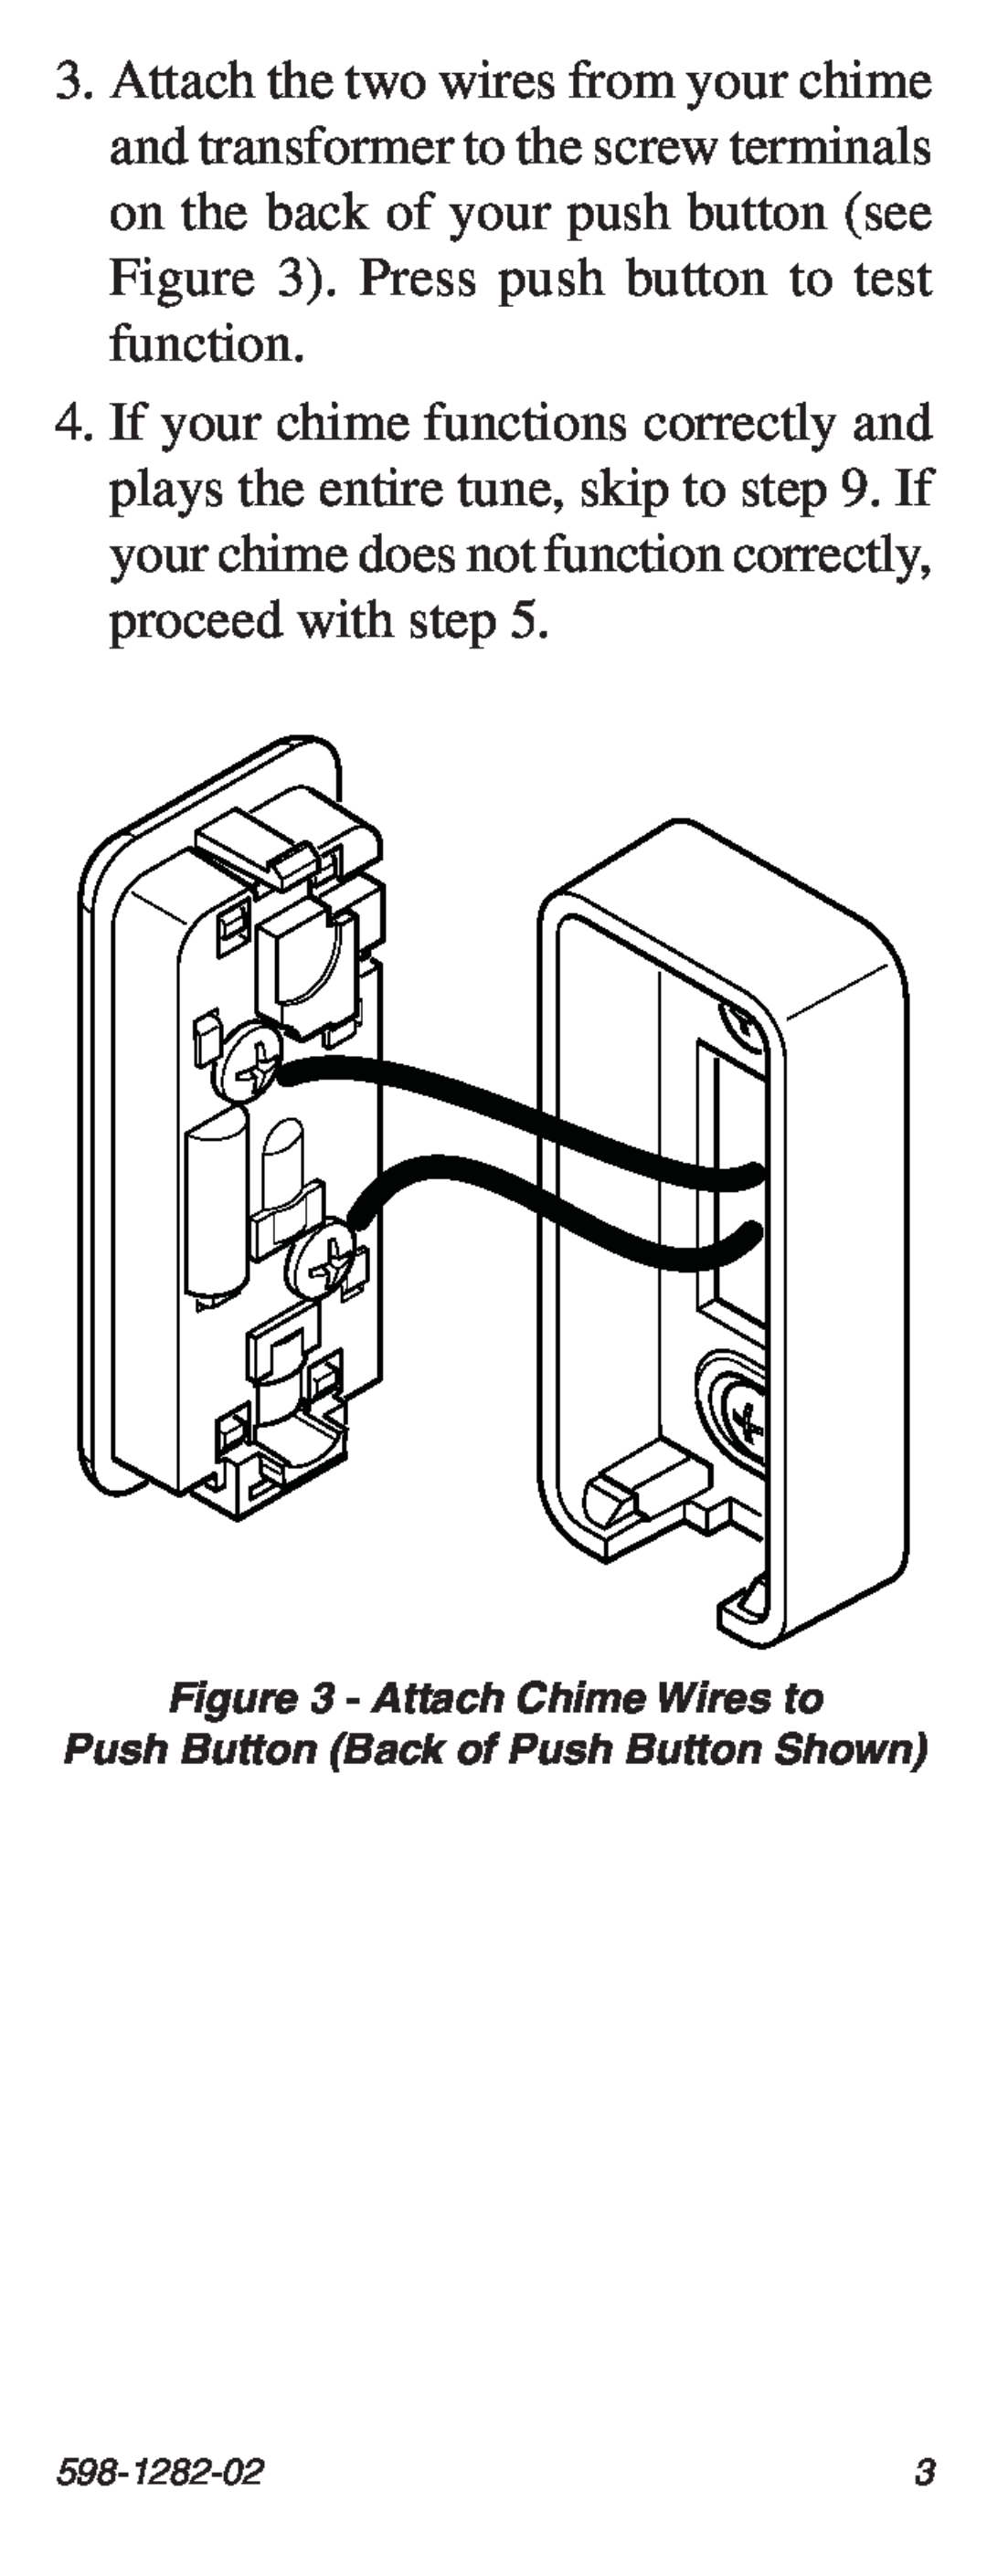 Heath Zenith 598-1282-02 manual Attach Chime Wires to, Push Button Back of Push Button Shown 